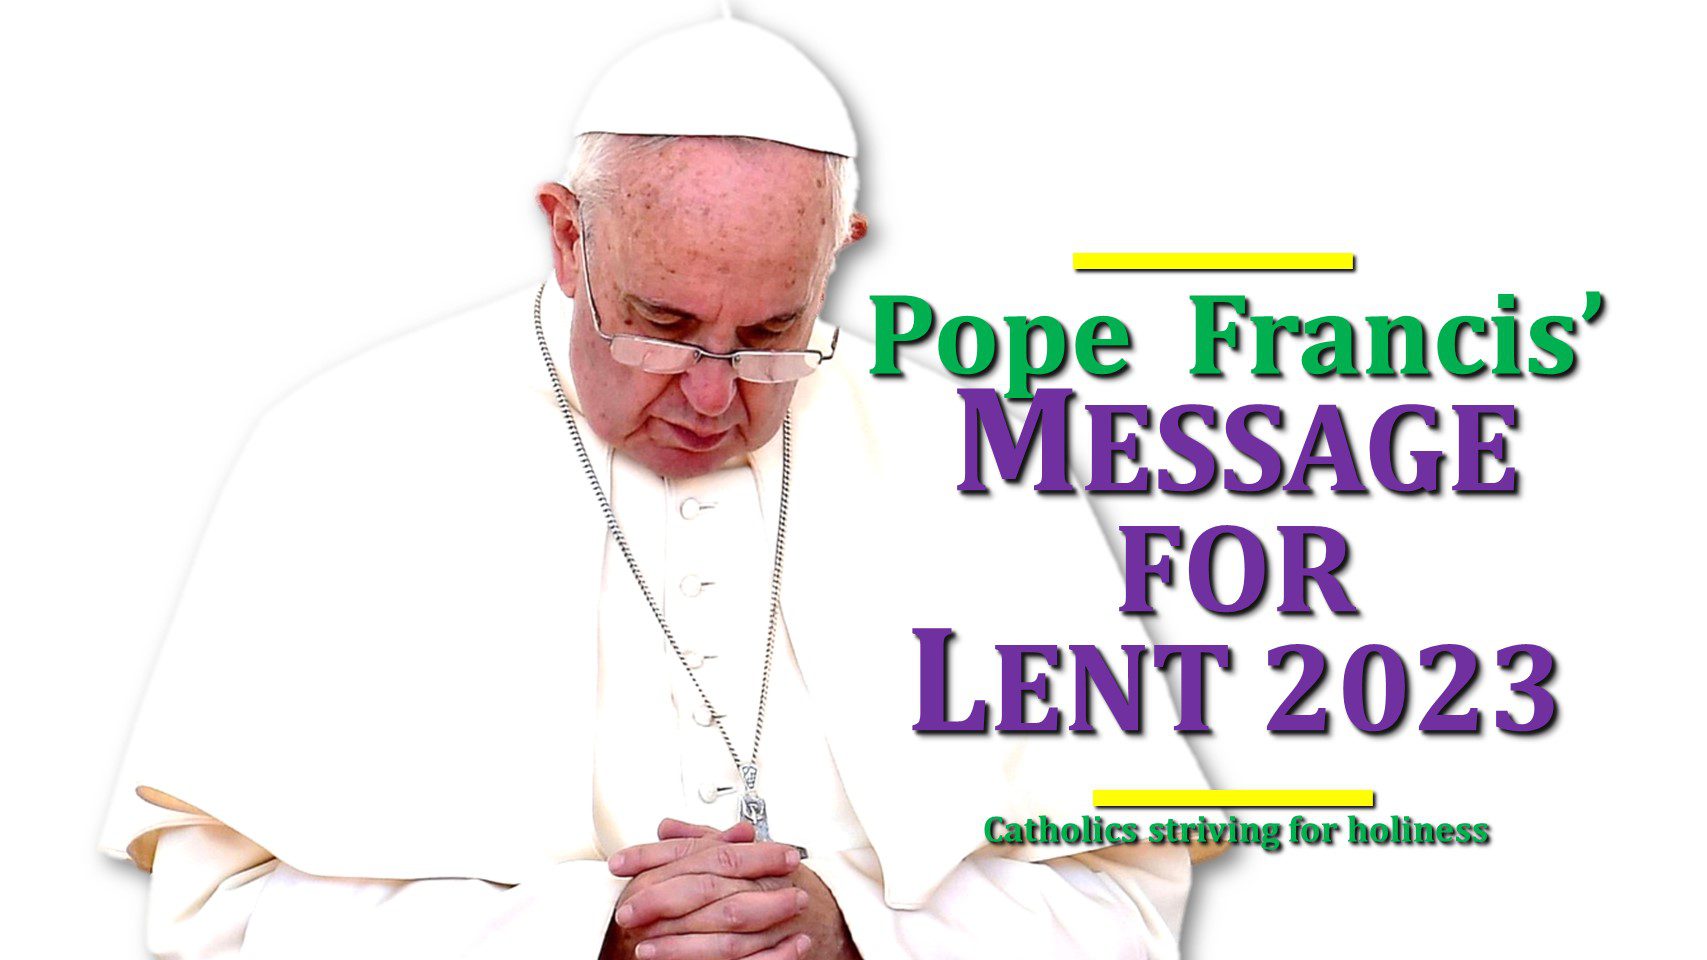 POPE FRANCIS' MESSAGE FOR LENT 2023 Catholics Striving For Holiness